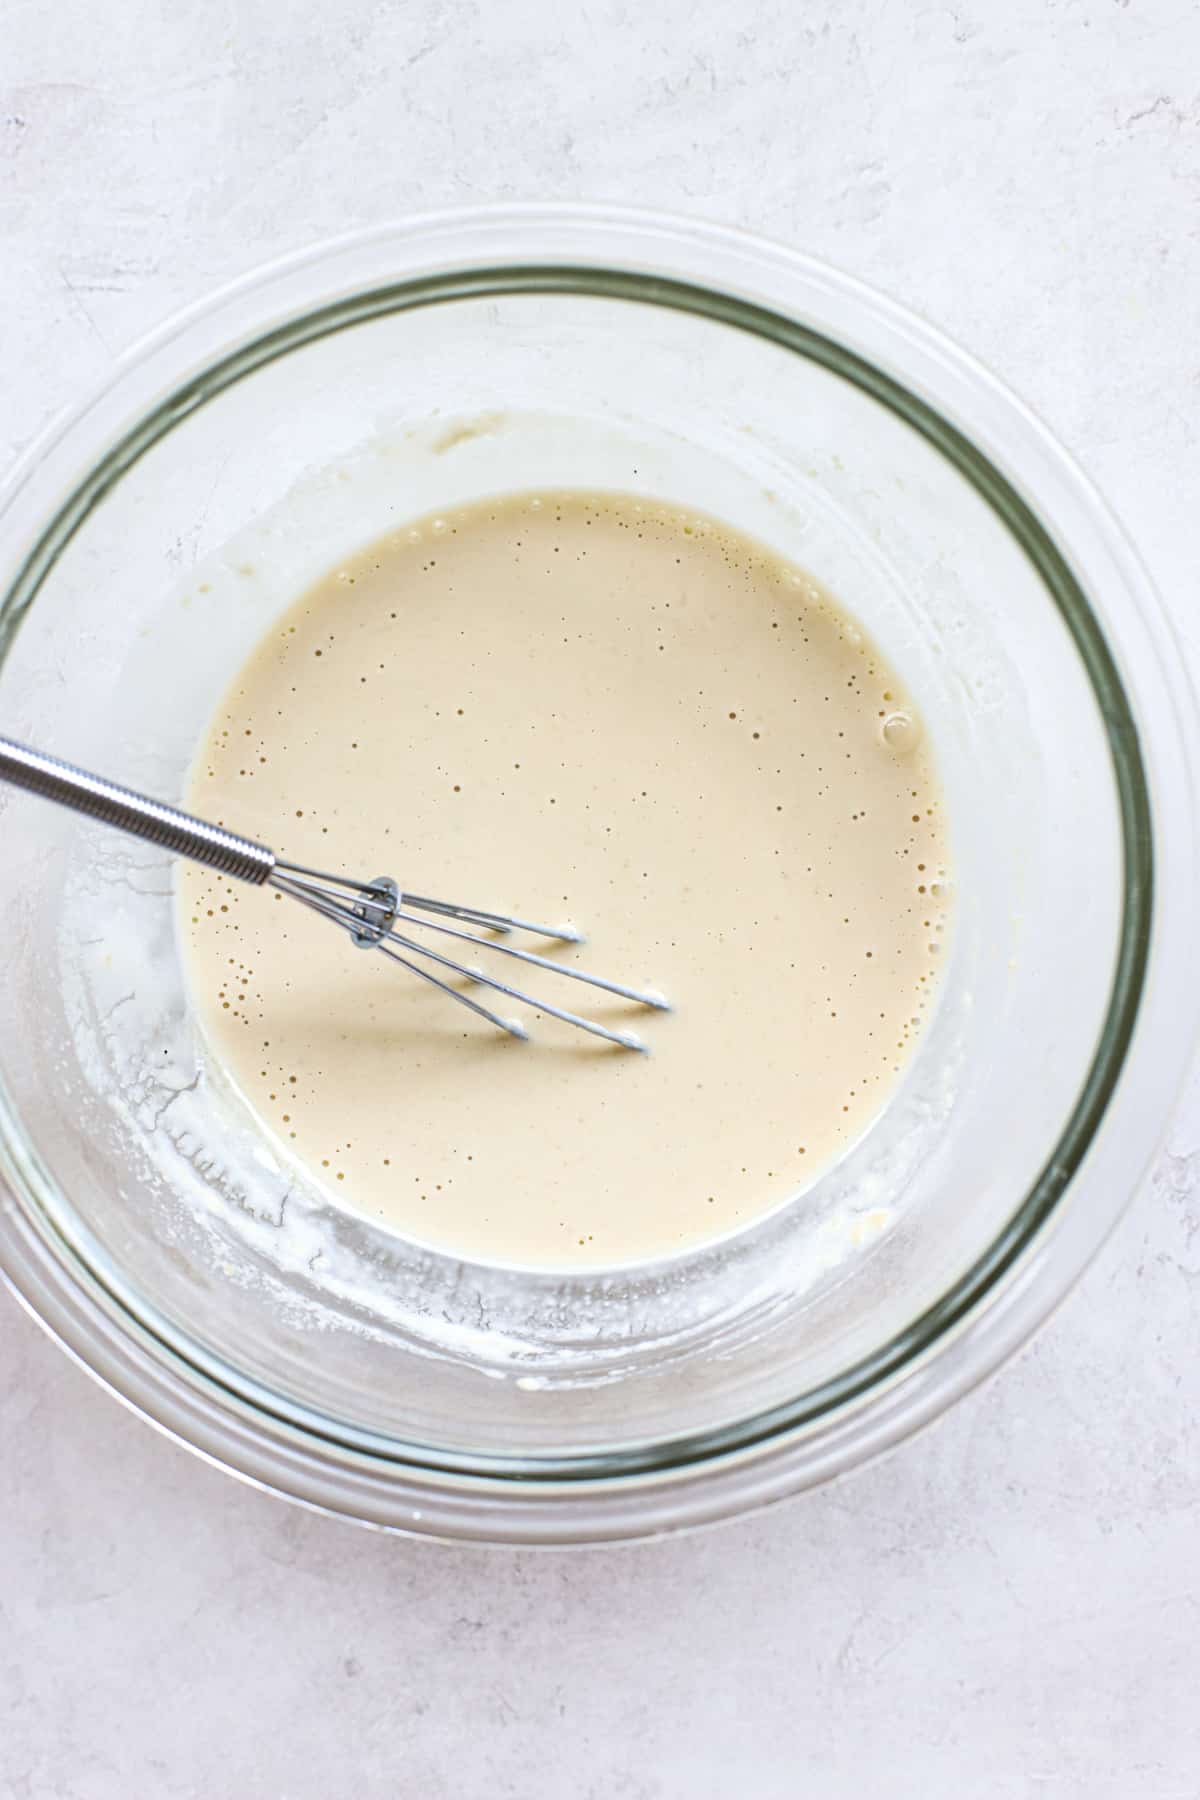 Tahini sauce completely whisked until smooth, in clear glass bowl on white and gray surface